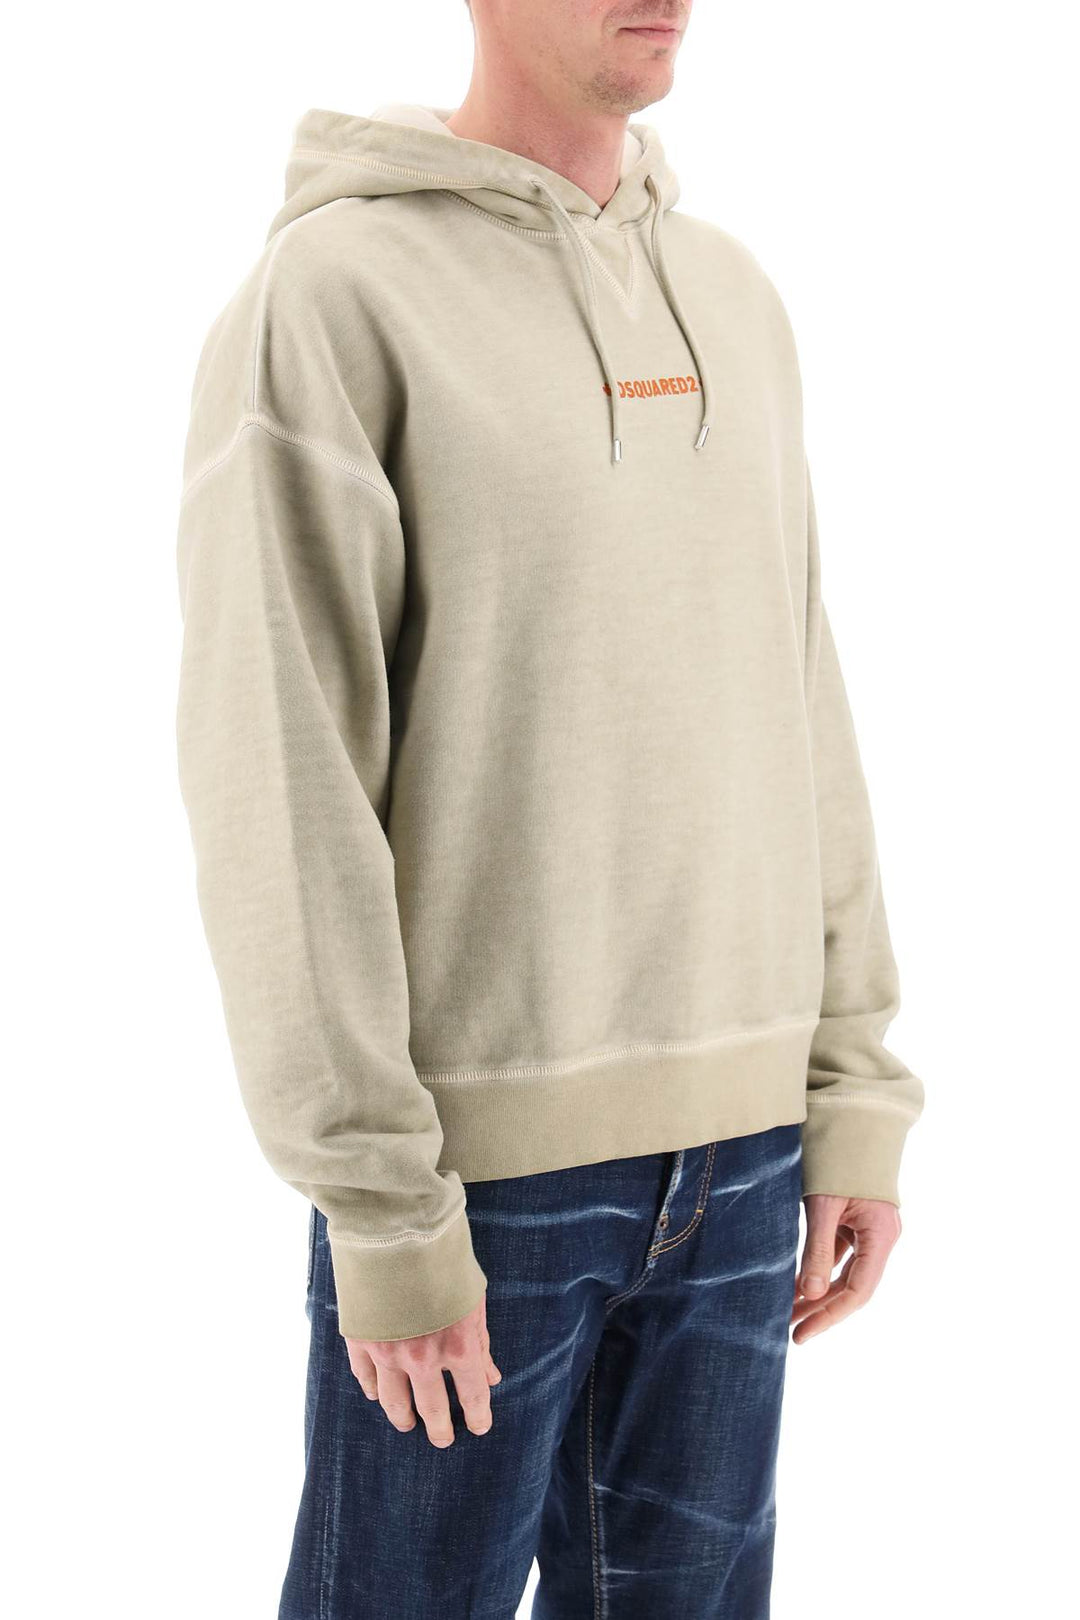 Dsquared2 Cipro Fit Hoodie   Beige